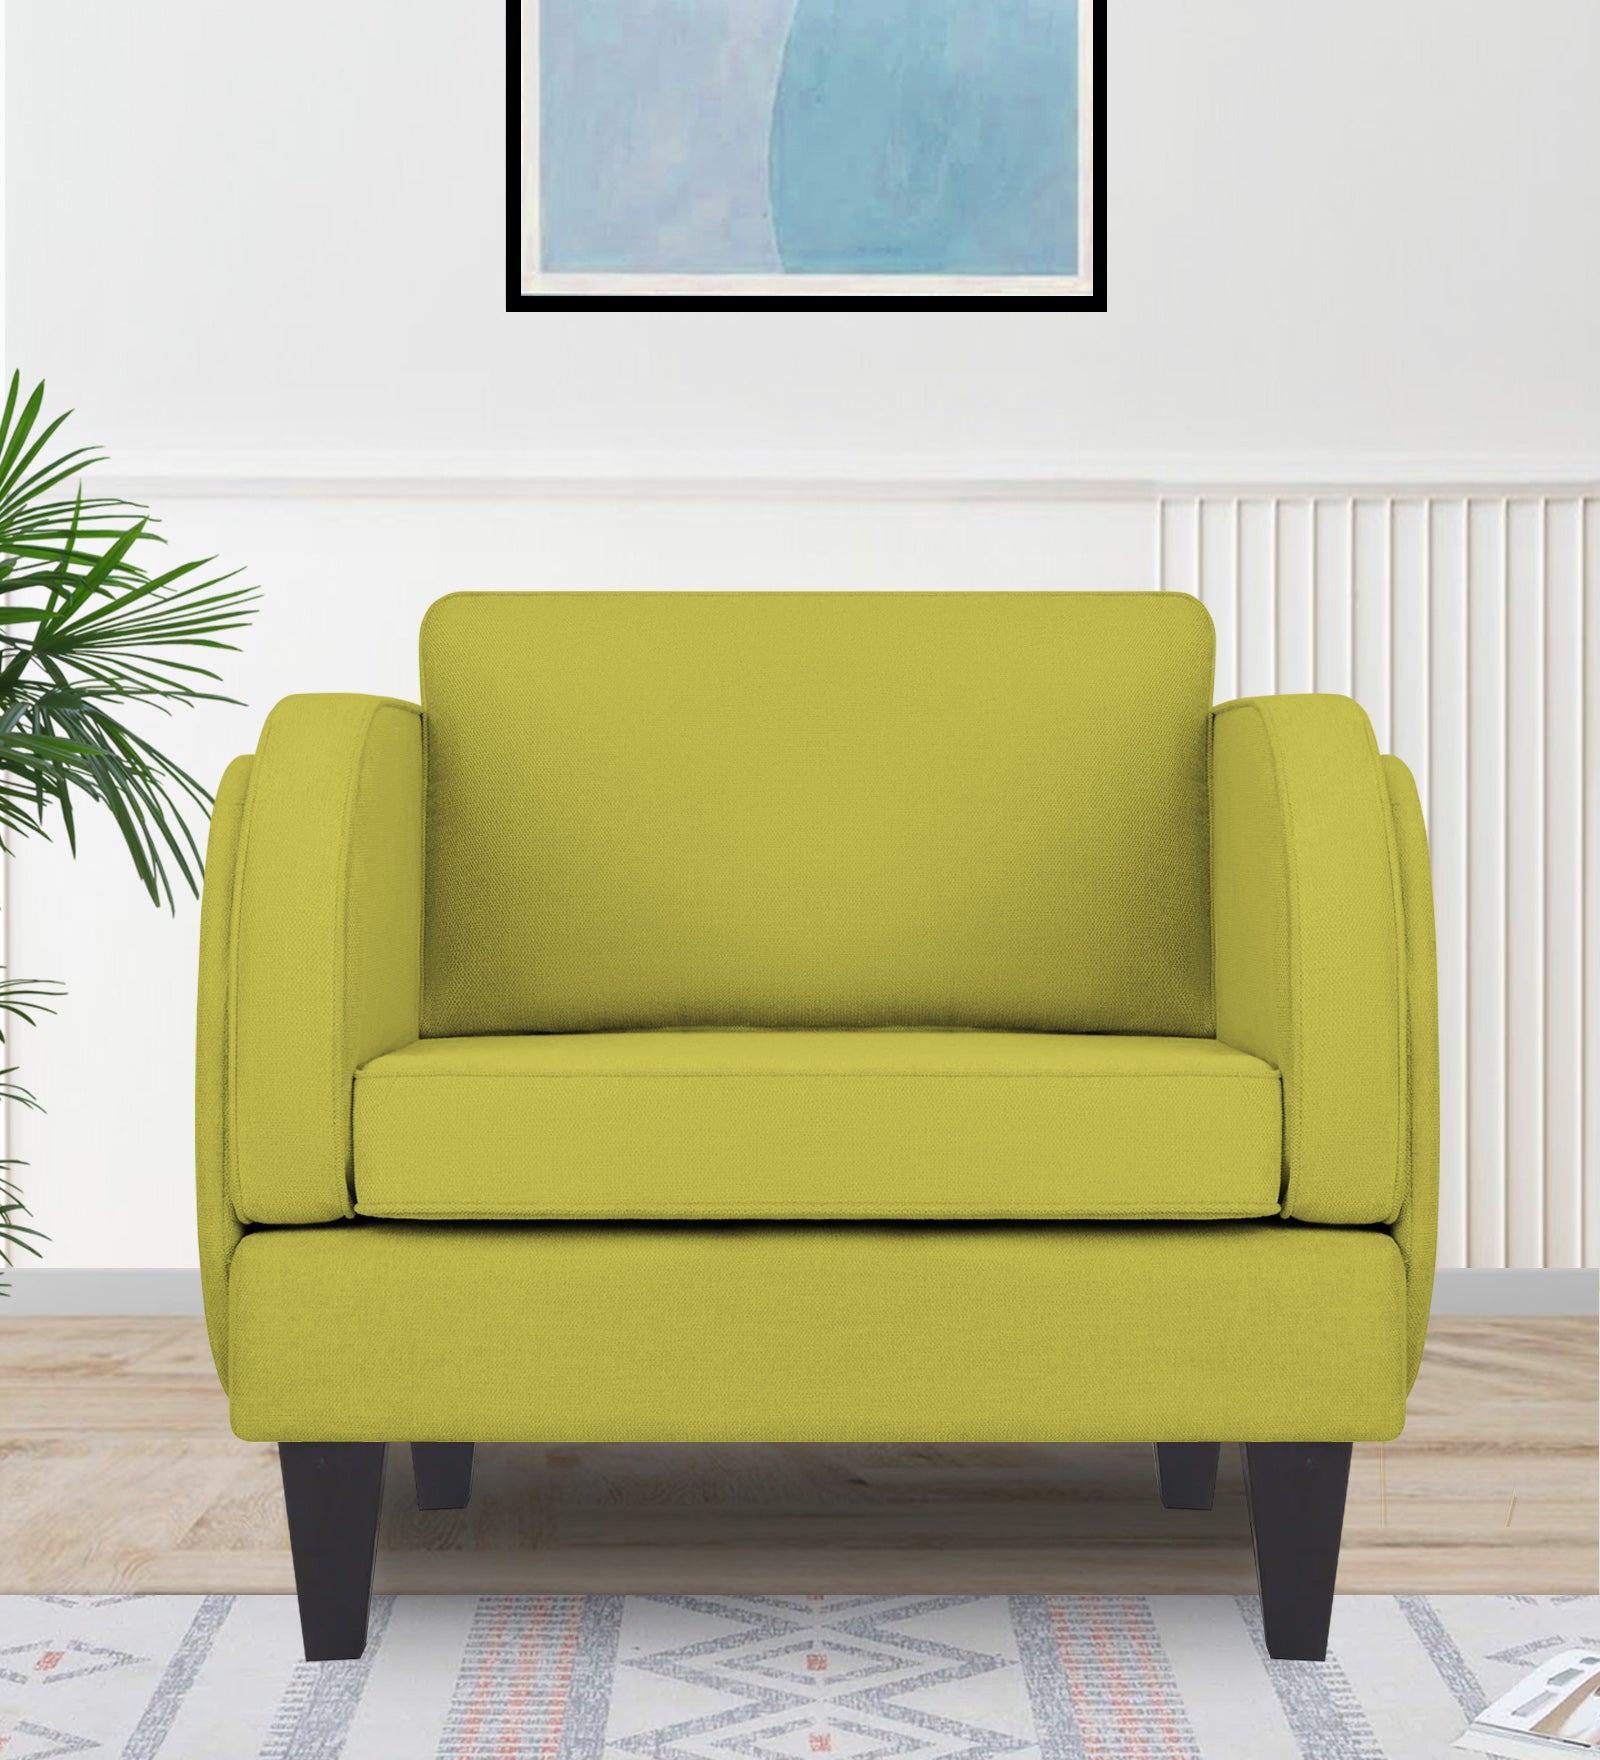 Siddy Fabric 1 Seater Sofa in Parrot Green Colour